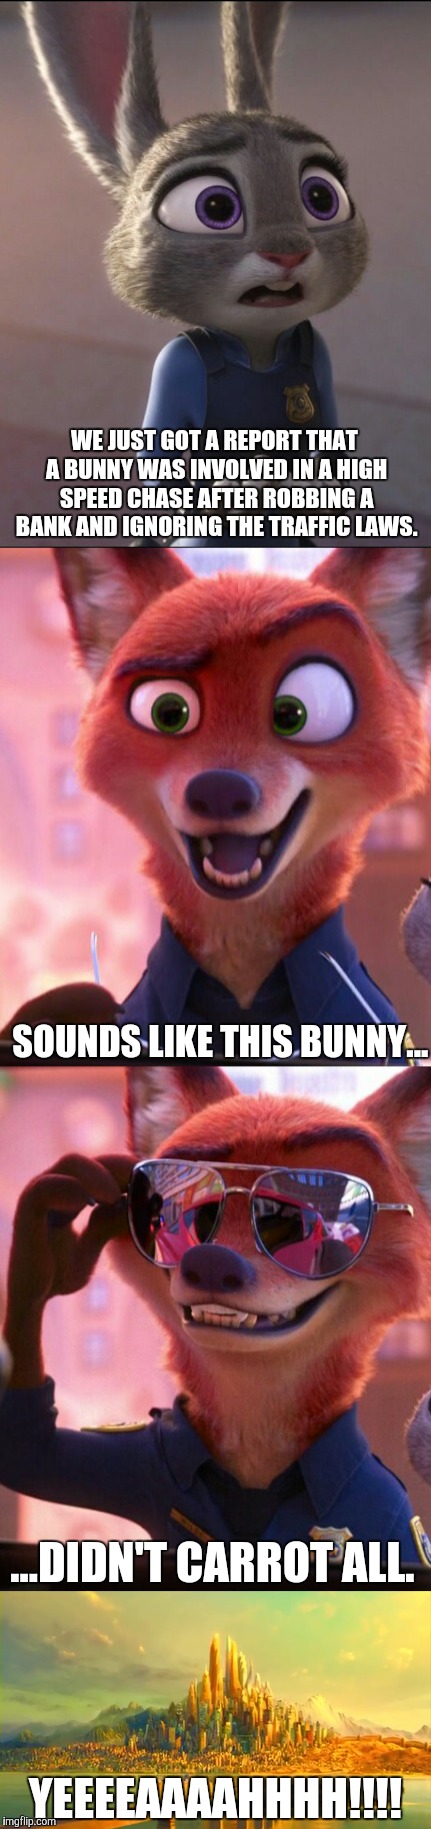 CSI: Zootopia 5 | WE JUST GOT A REPORT THAT A BUNNY WAS INVOLVED IN A HIGH SPEED CHASE AFTER ROBBING A BANK AND IGNORING THE TRAFFIC LAWS. SOUNDS LIKE THIS BUNNY... ...DIDN'T CARROT ALL. YEEEEAAAAHHHH!!!! | image tagged in zootopia,judy hopps,nick wilde,parody,funny,memes | made w/ Imgflip meme maker